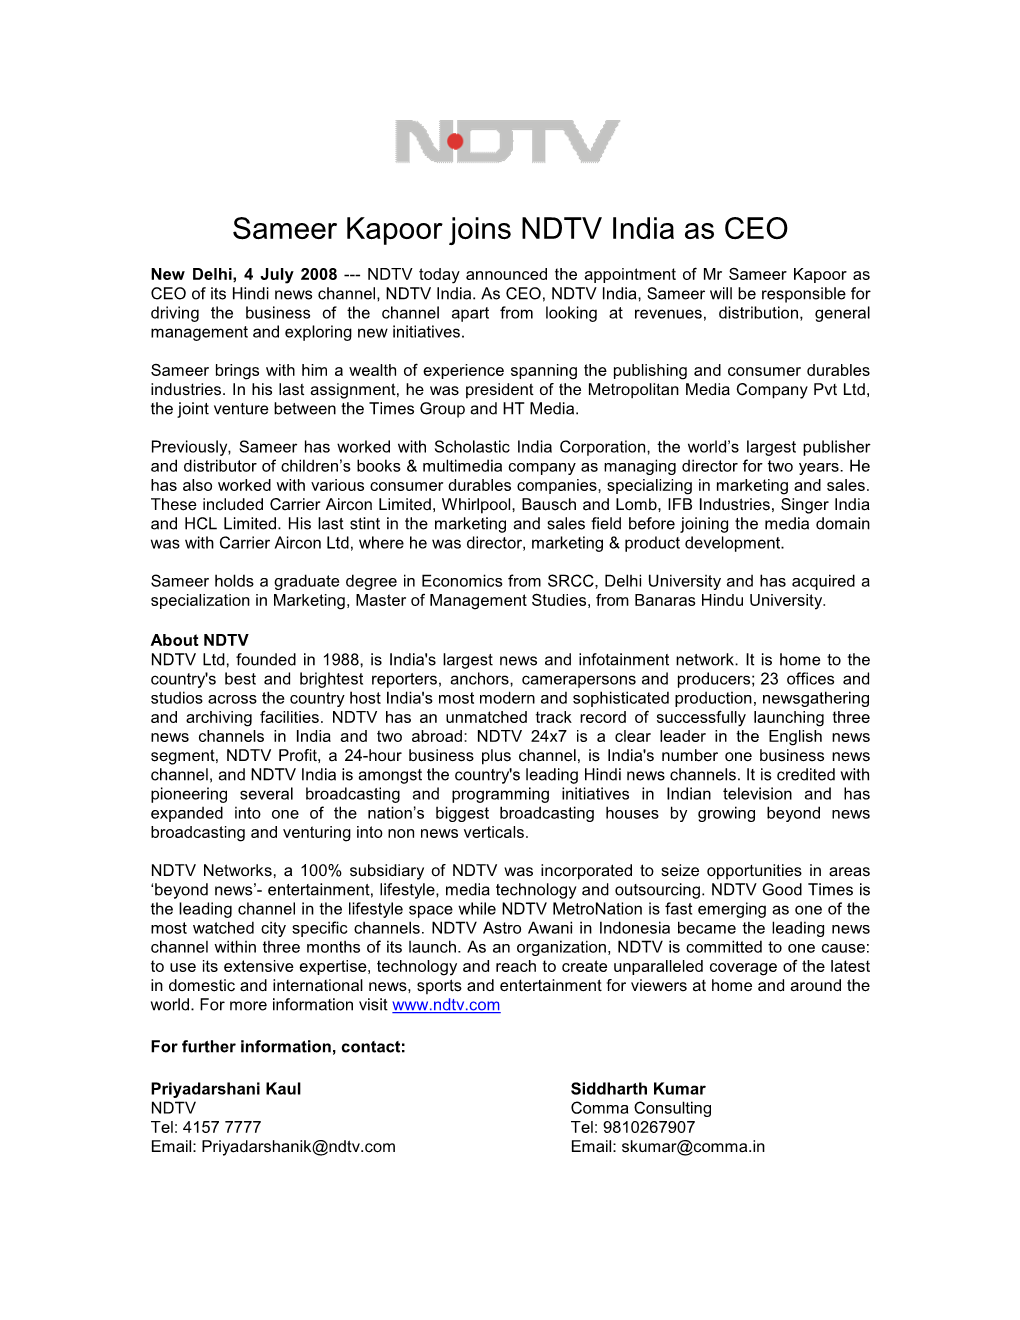 Sameer Kapoor Joins NDTV India As CEO